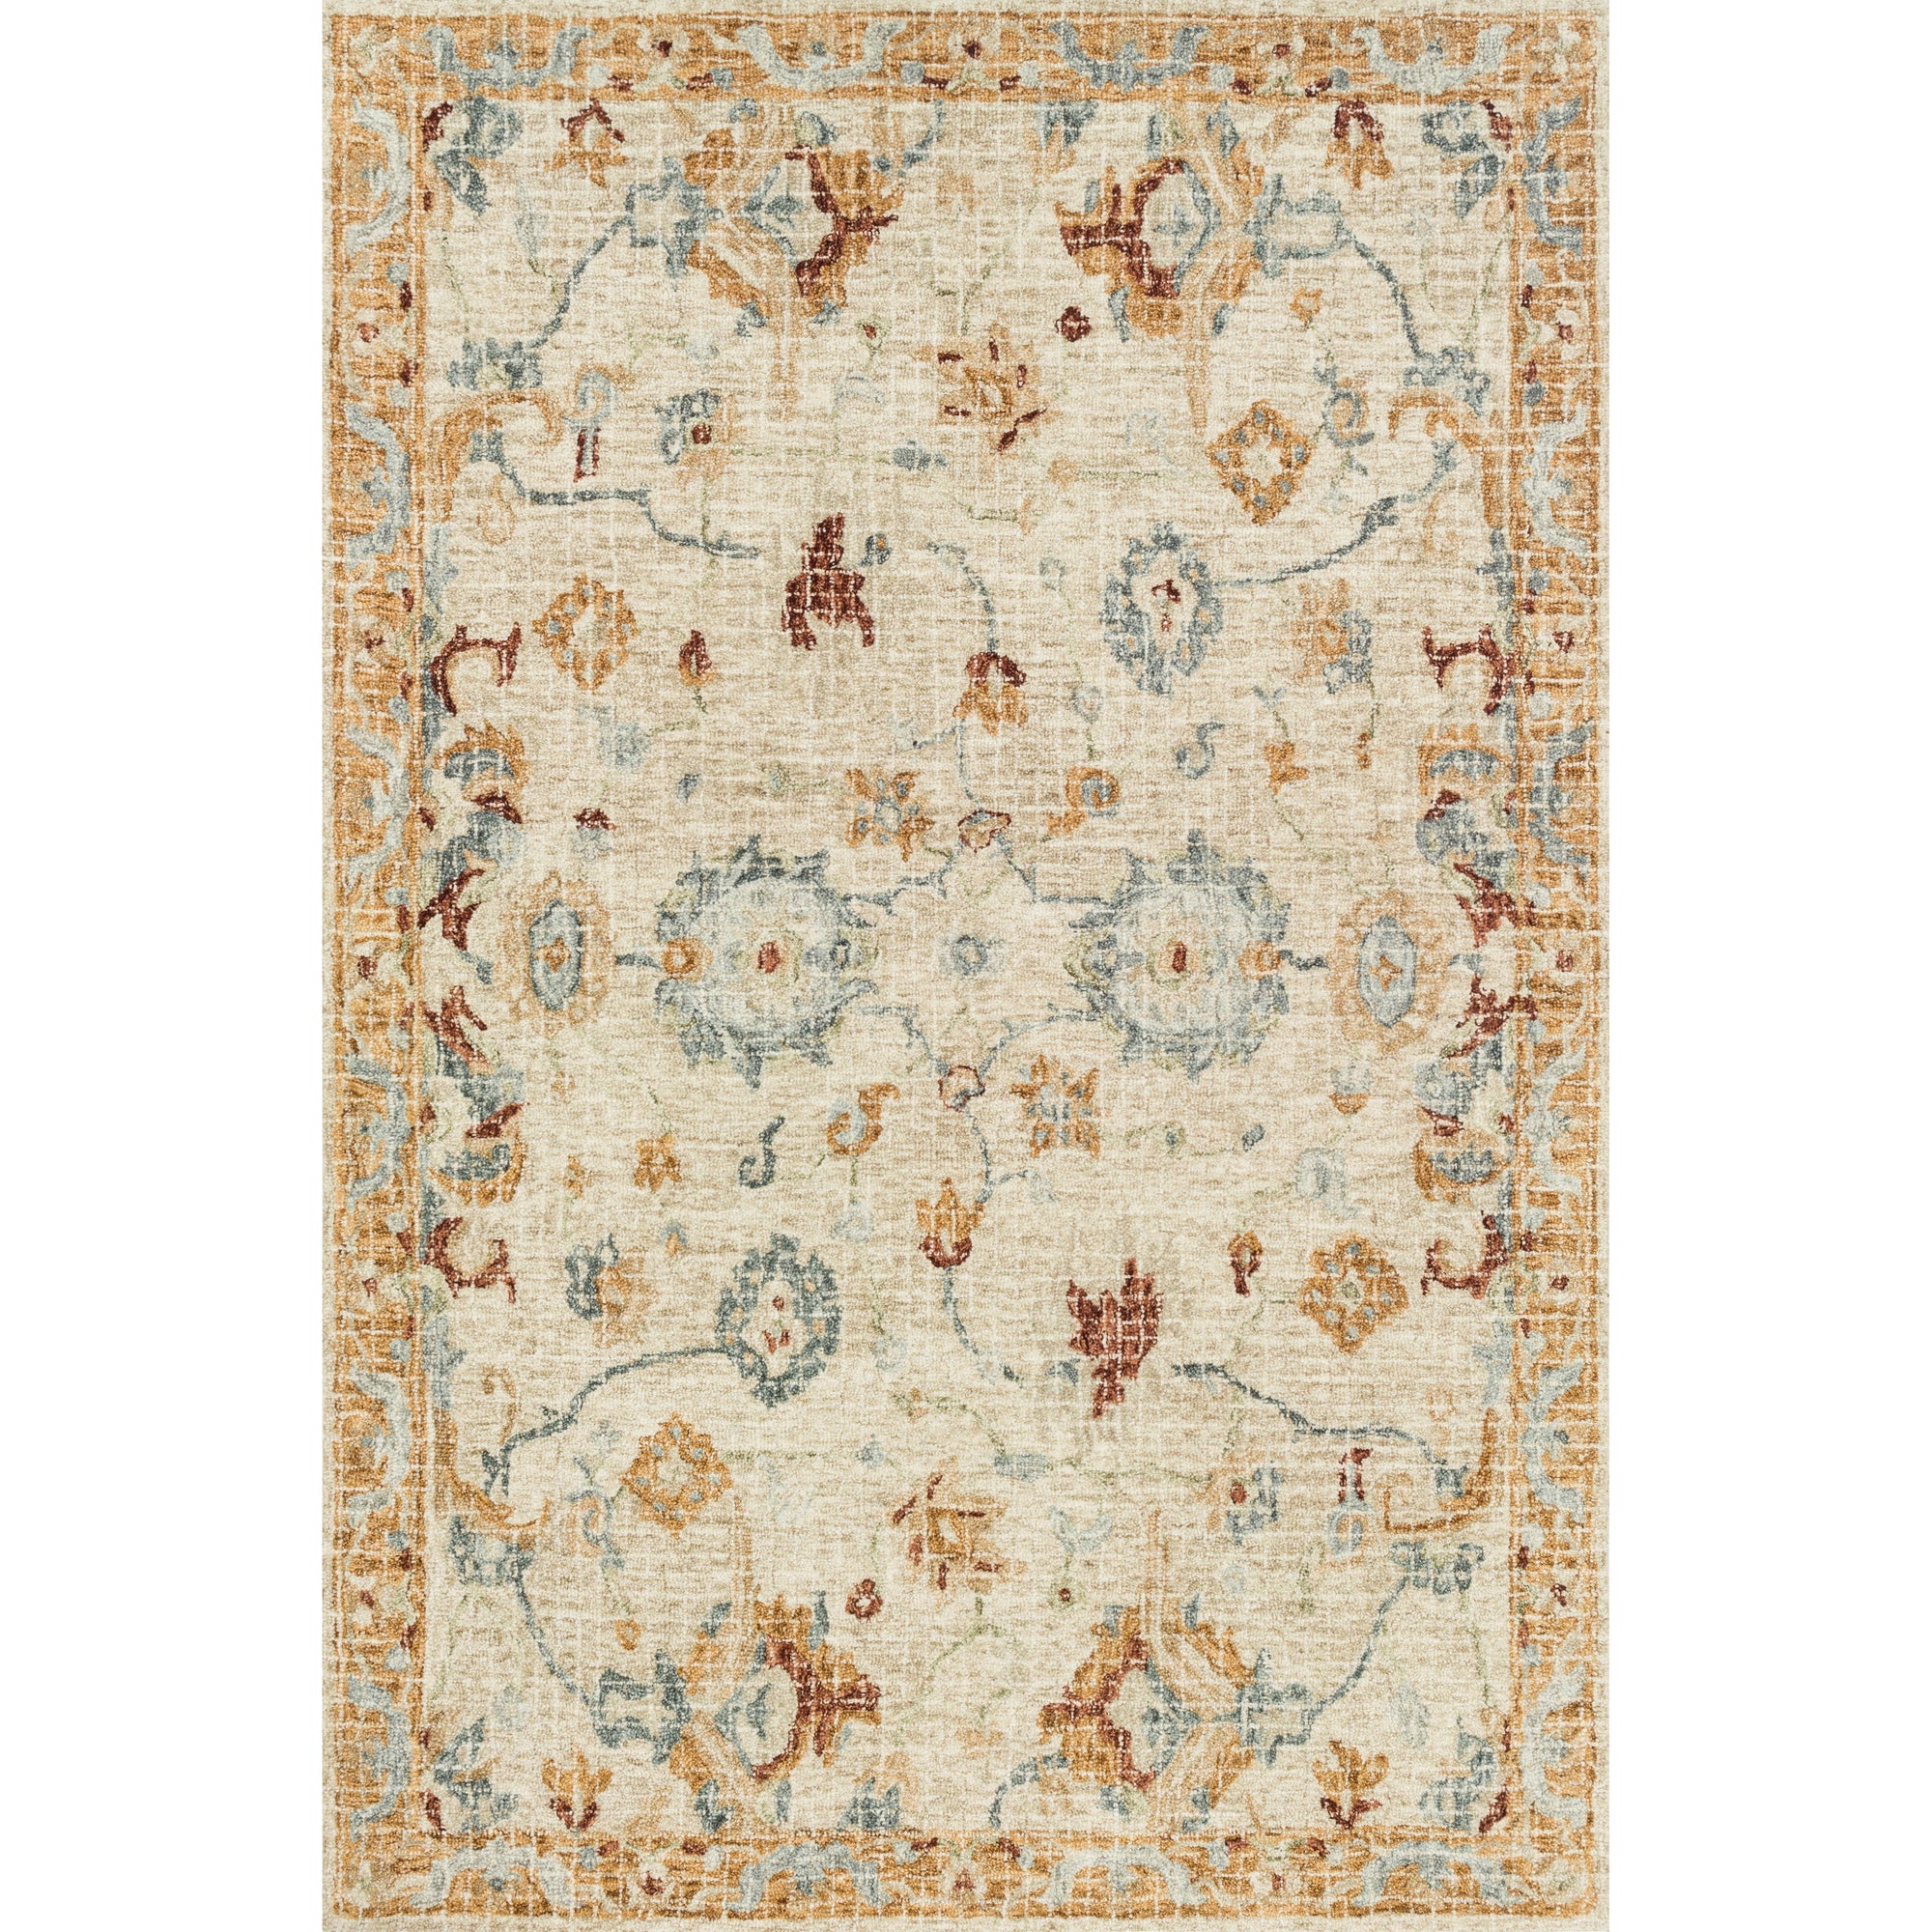 Rugs by Roo Loloi Julian Ivory Multi Area Rug in size 18" x 18" Sample